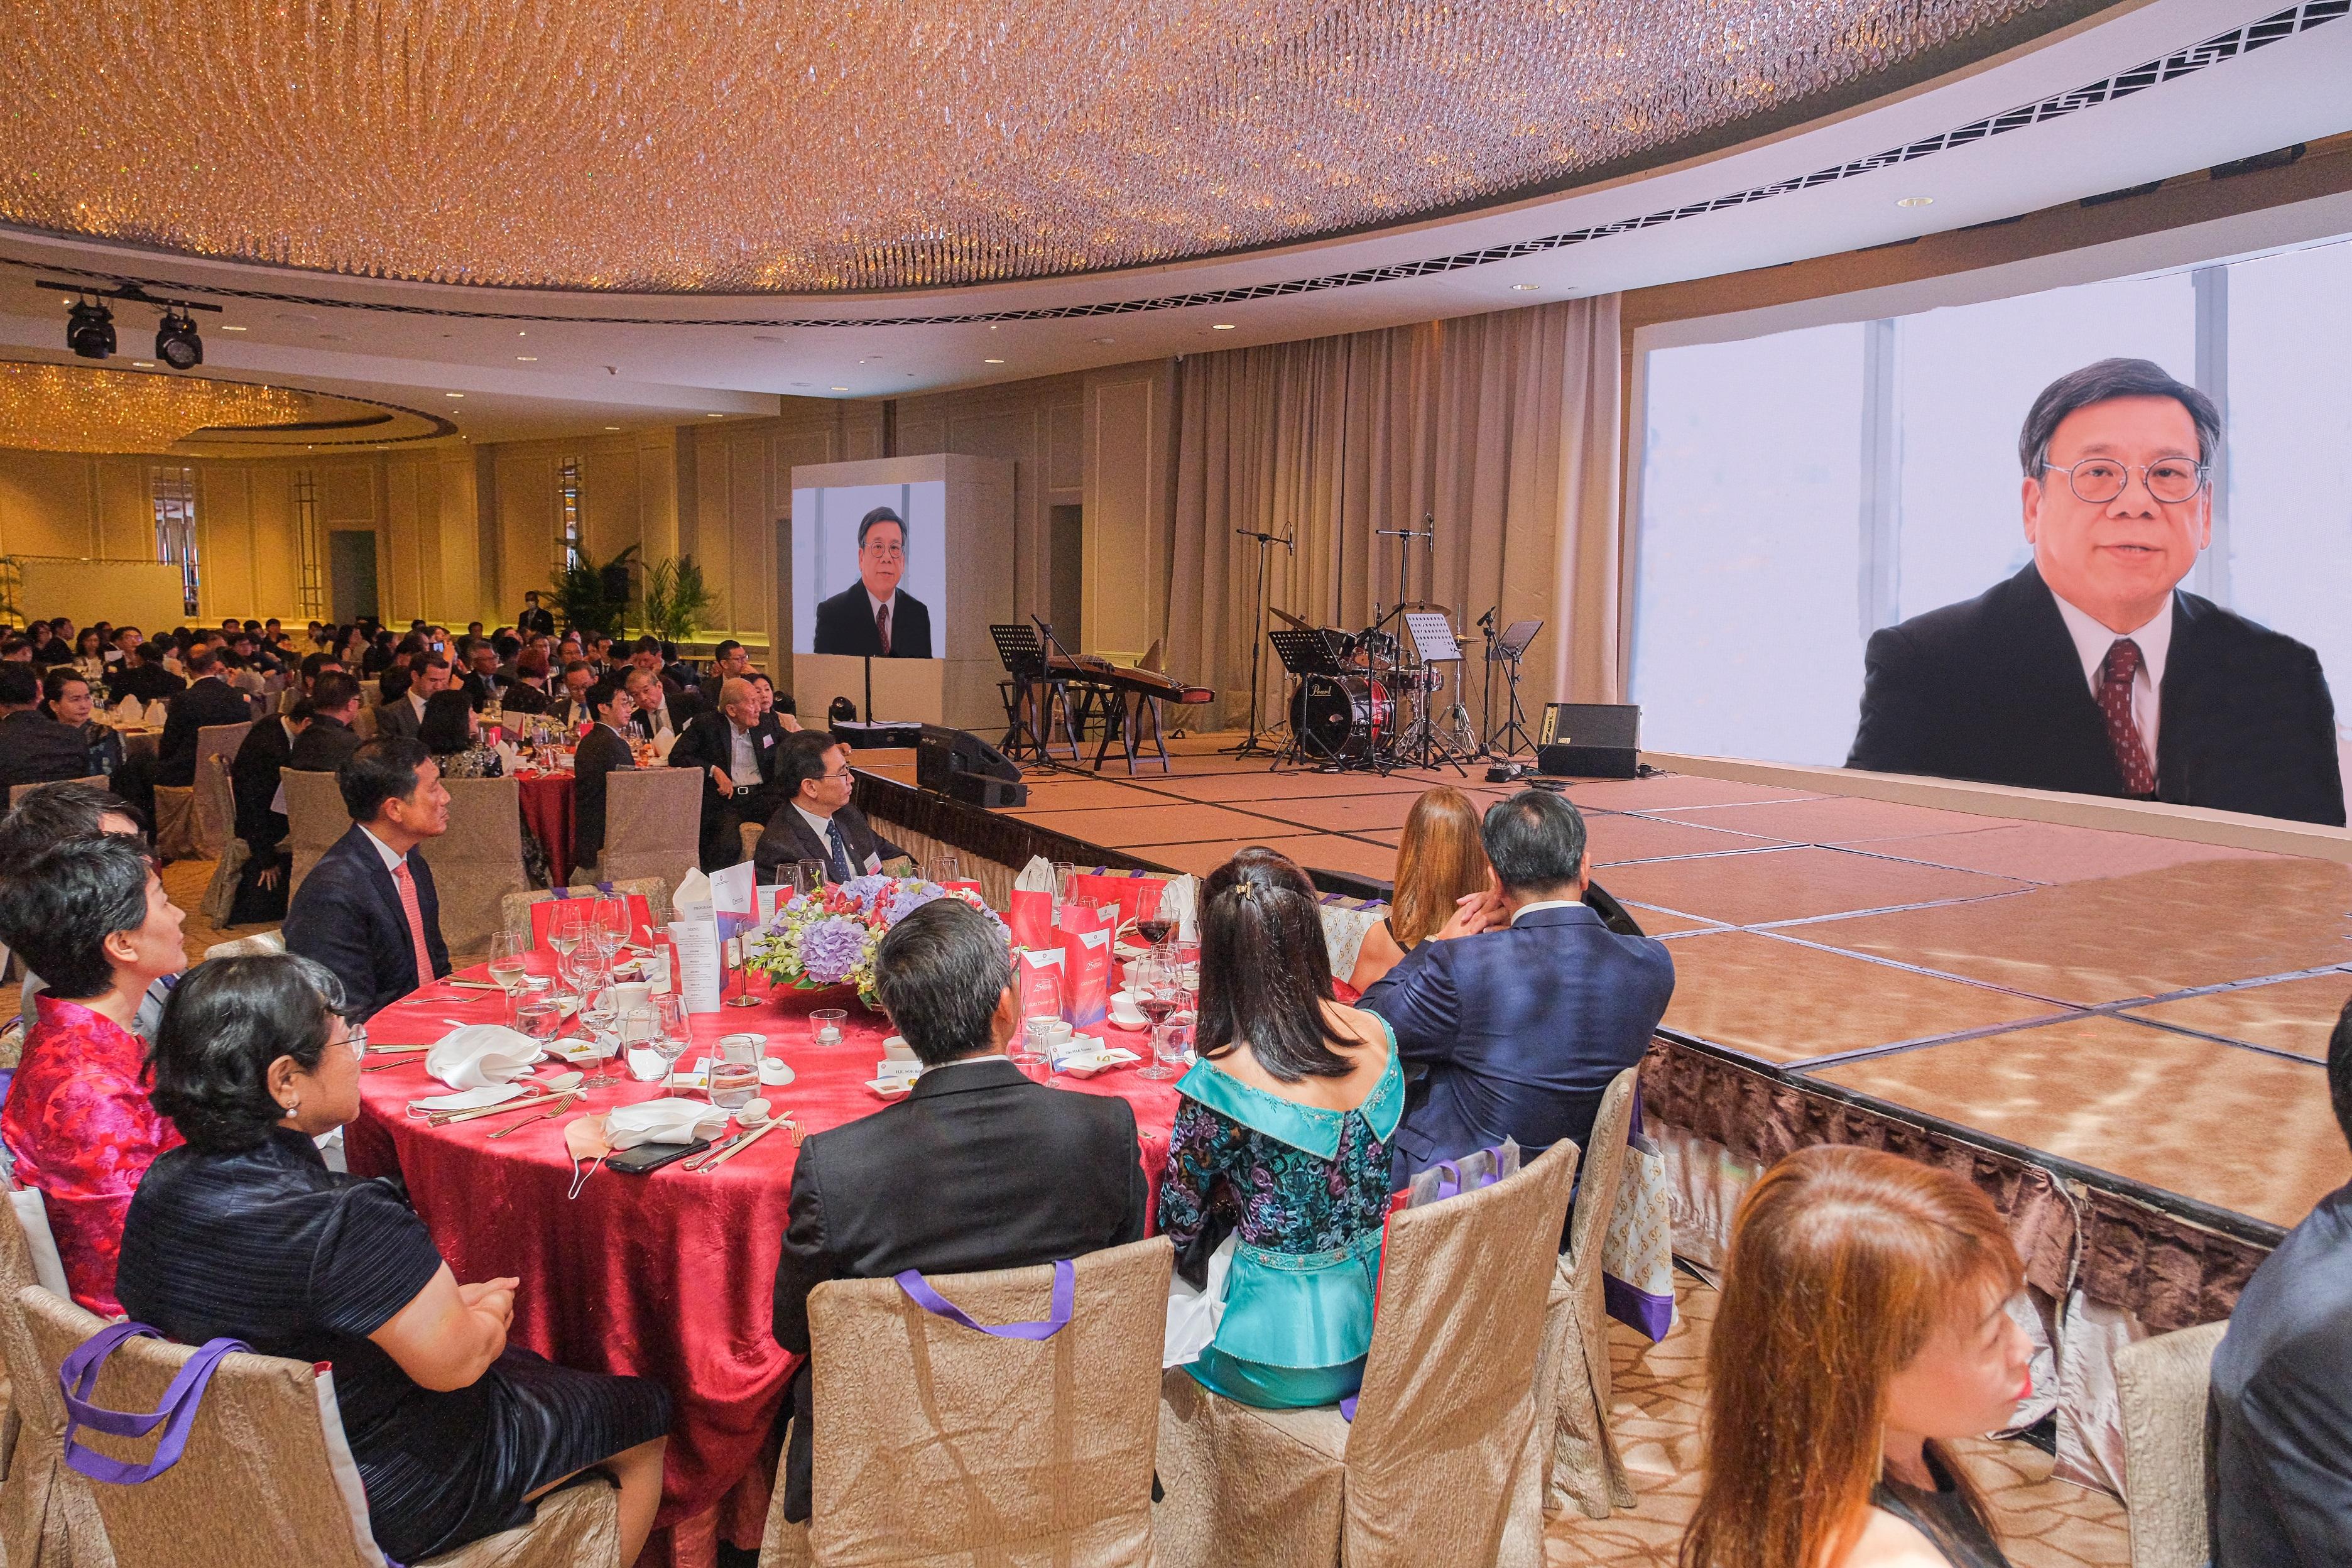 The Hong Kong Economic and Trade Office in Singapore hosted a gala dinner in Singapore today (August 3) in celebration of the 25th anniversary of the establishment of the Hong Kong Special Administrative Region. Photo shows the Secretary for Commerce and Economic Development, Mr Algernon Yau, giving a virtual keynote speech at the gala dinner.